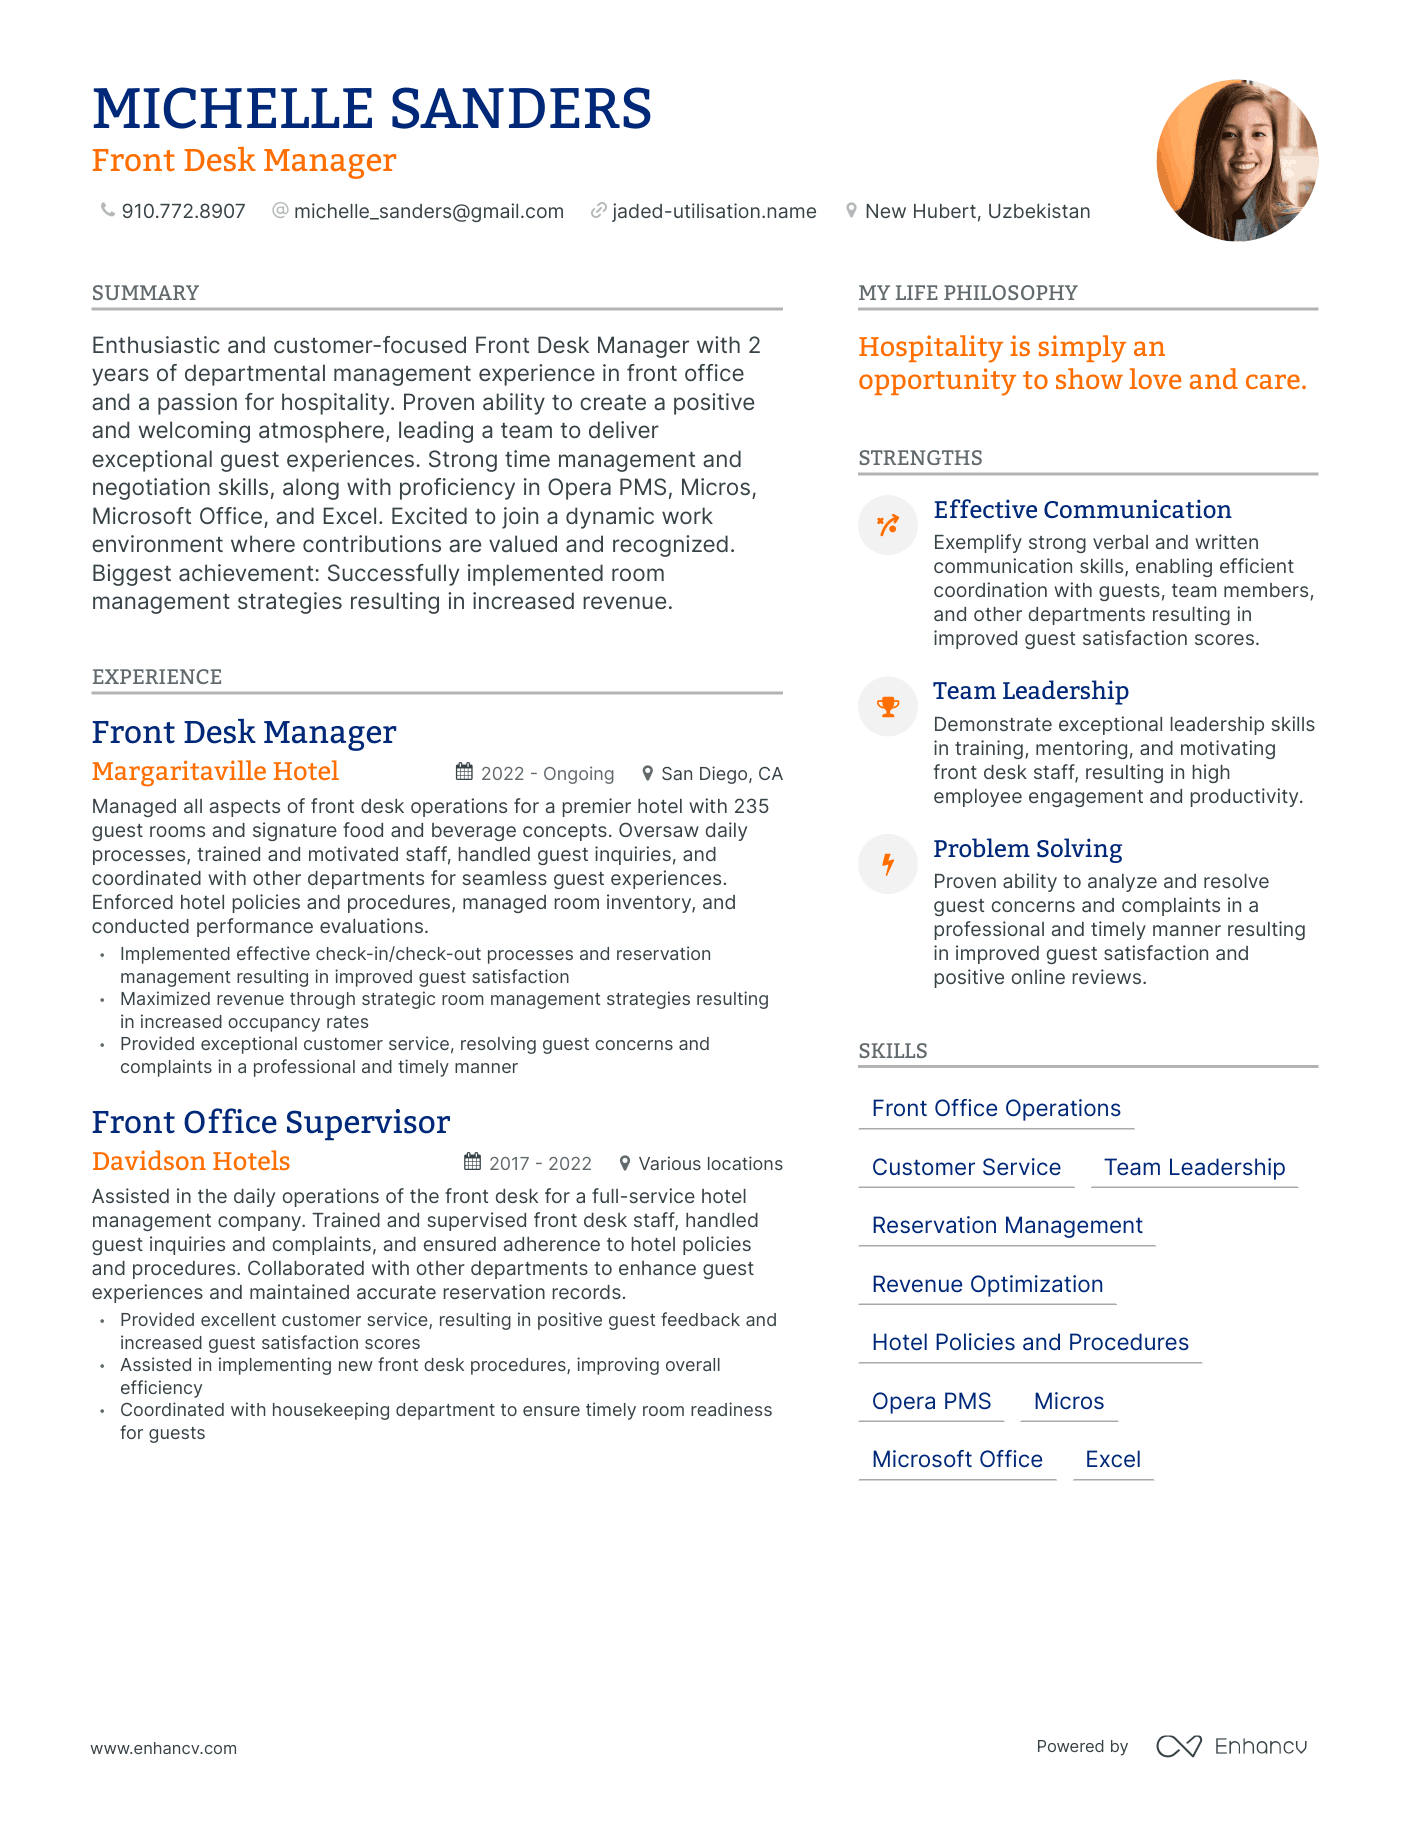 Front Desk Manager resume example